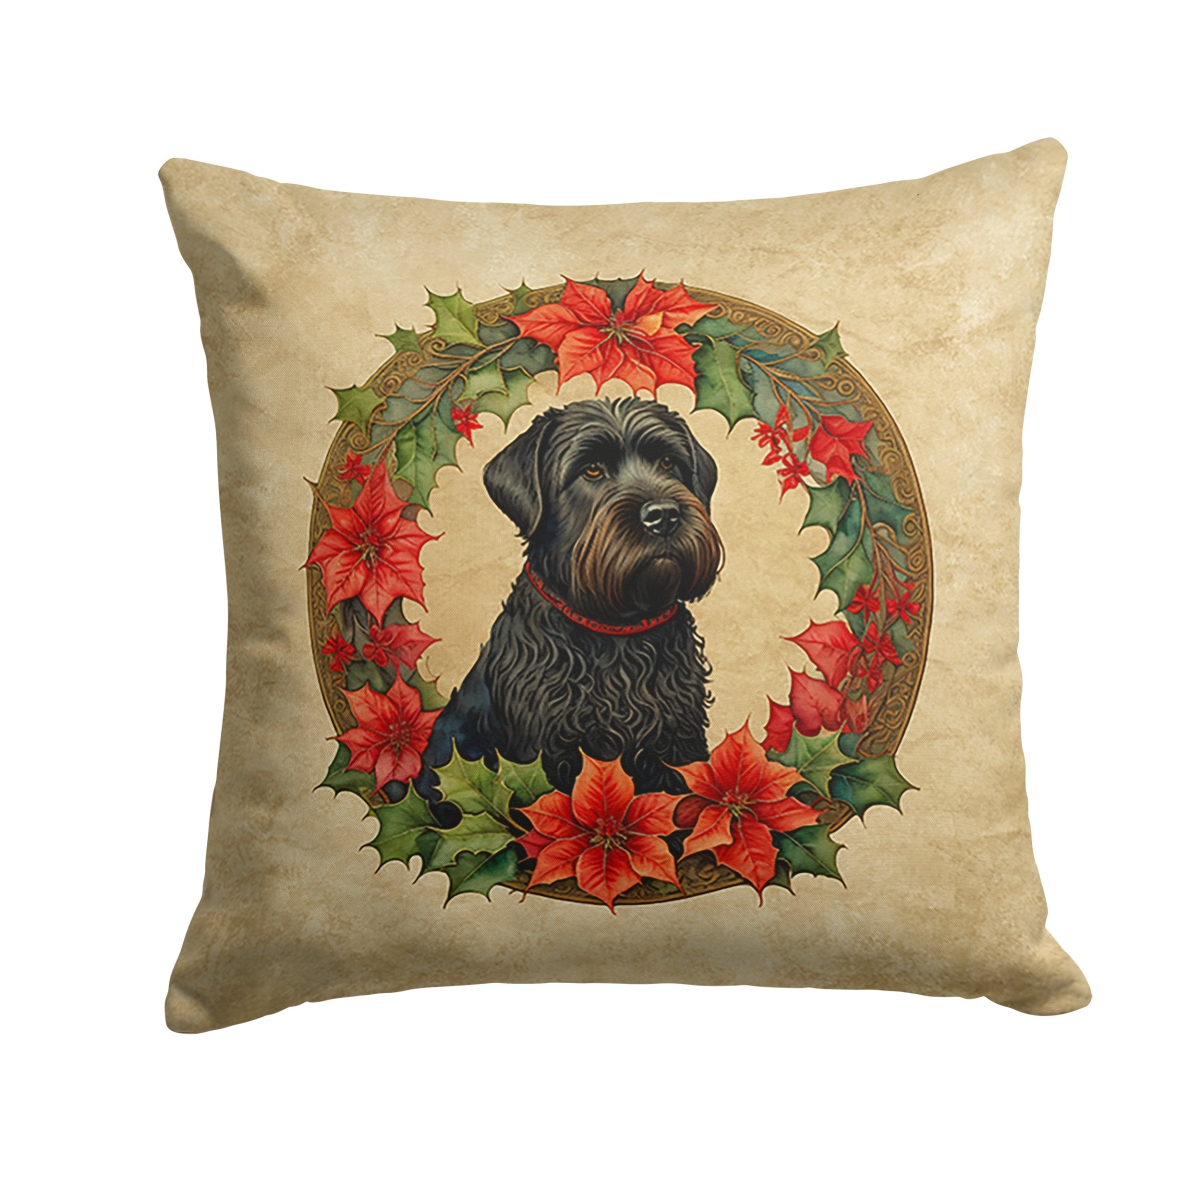 Caroline's Treasures DAC2322PW1414 14 x 14 in. Unisex Black Russian Terrier Christmas Flowers Polyester Fabric Throw Pillow